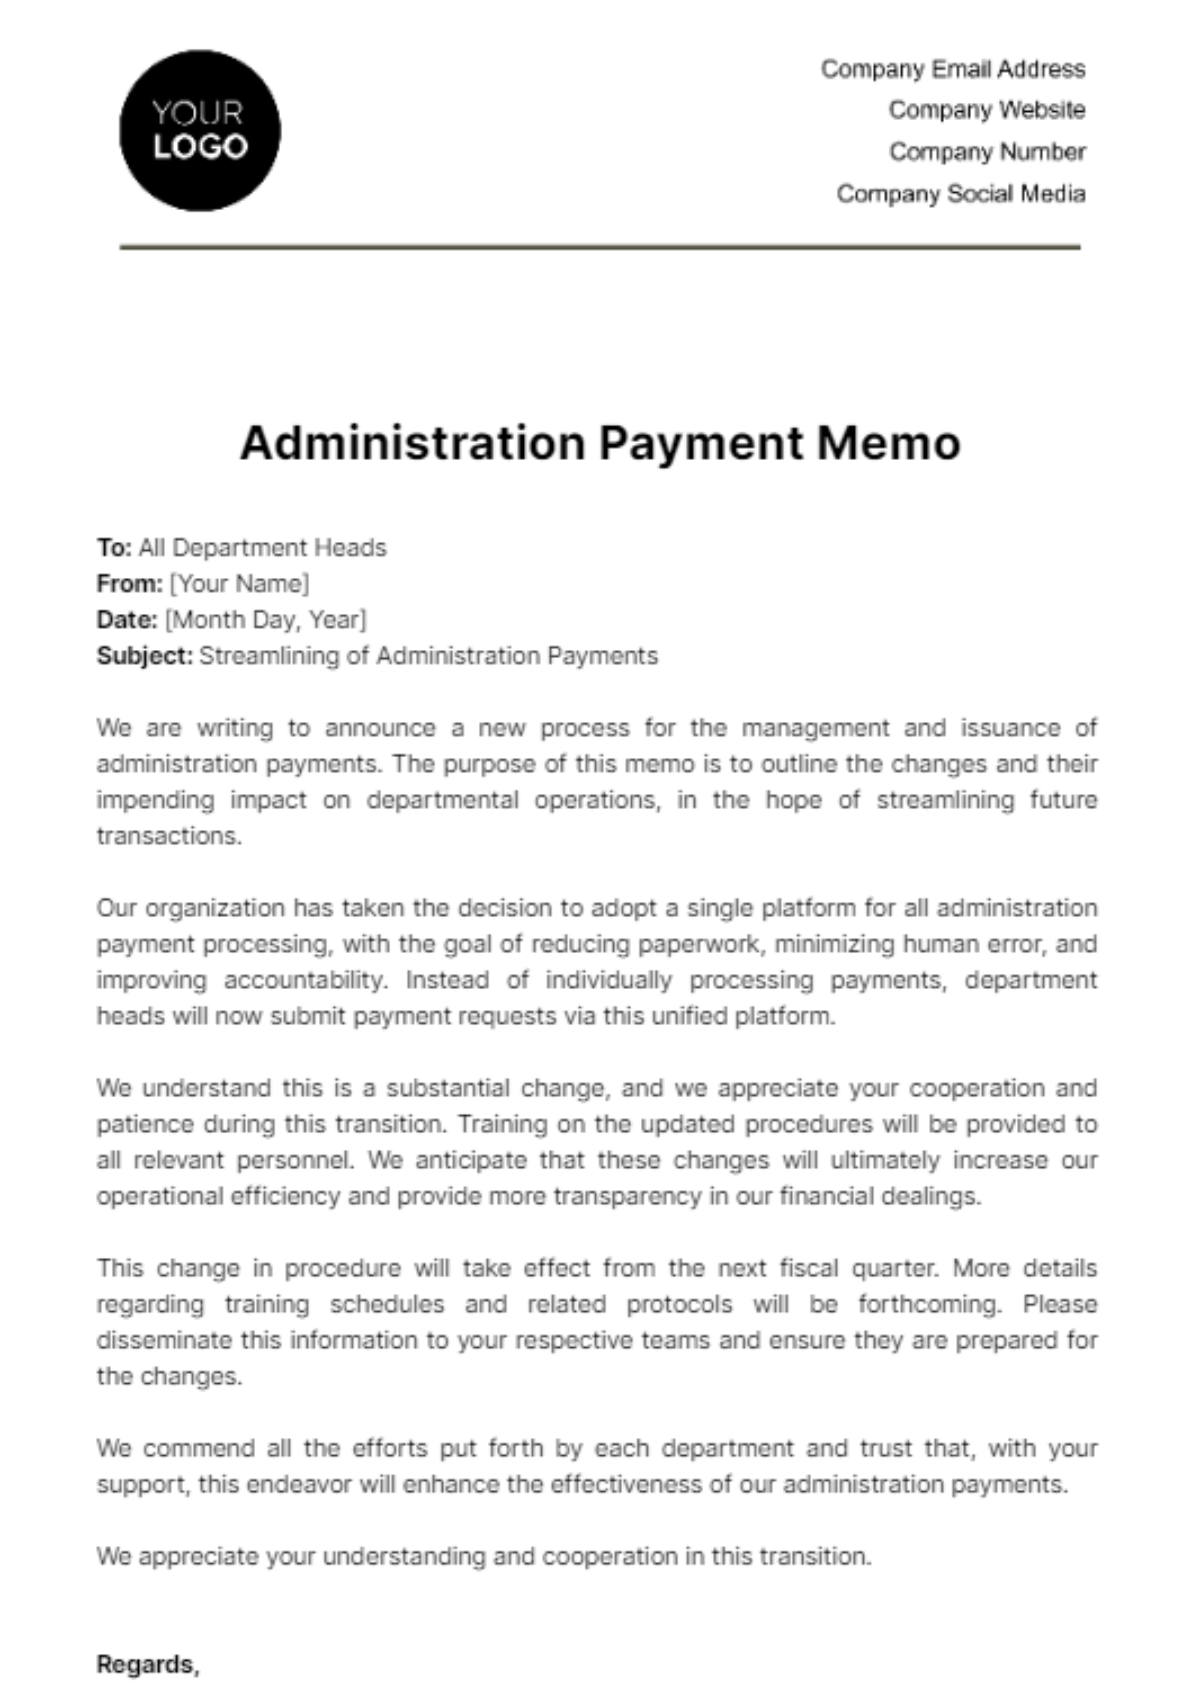 Administration Payment Memo Template